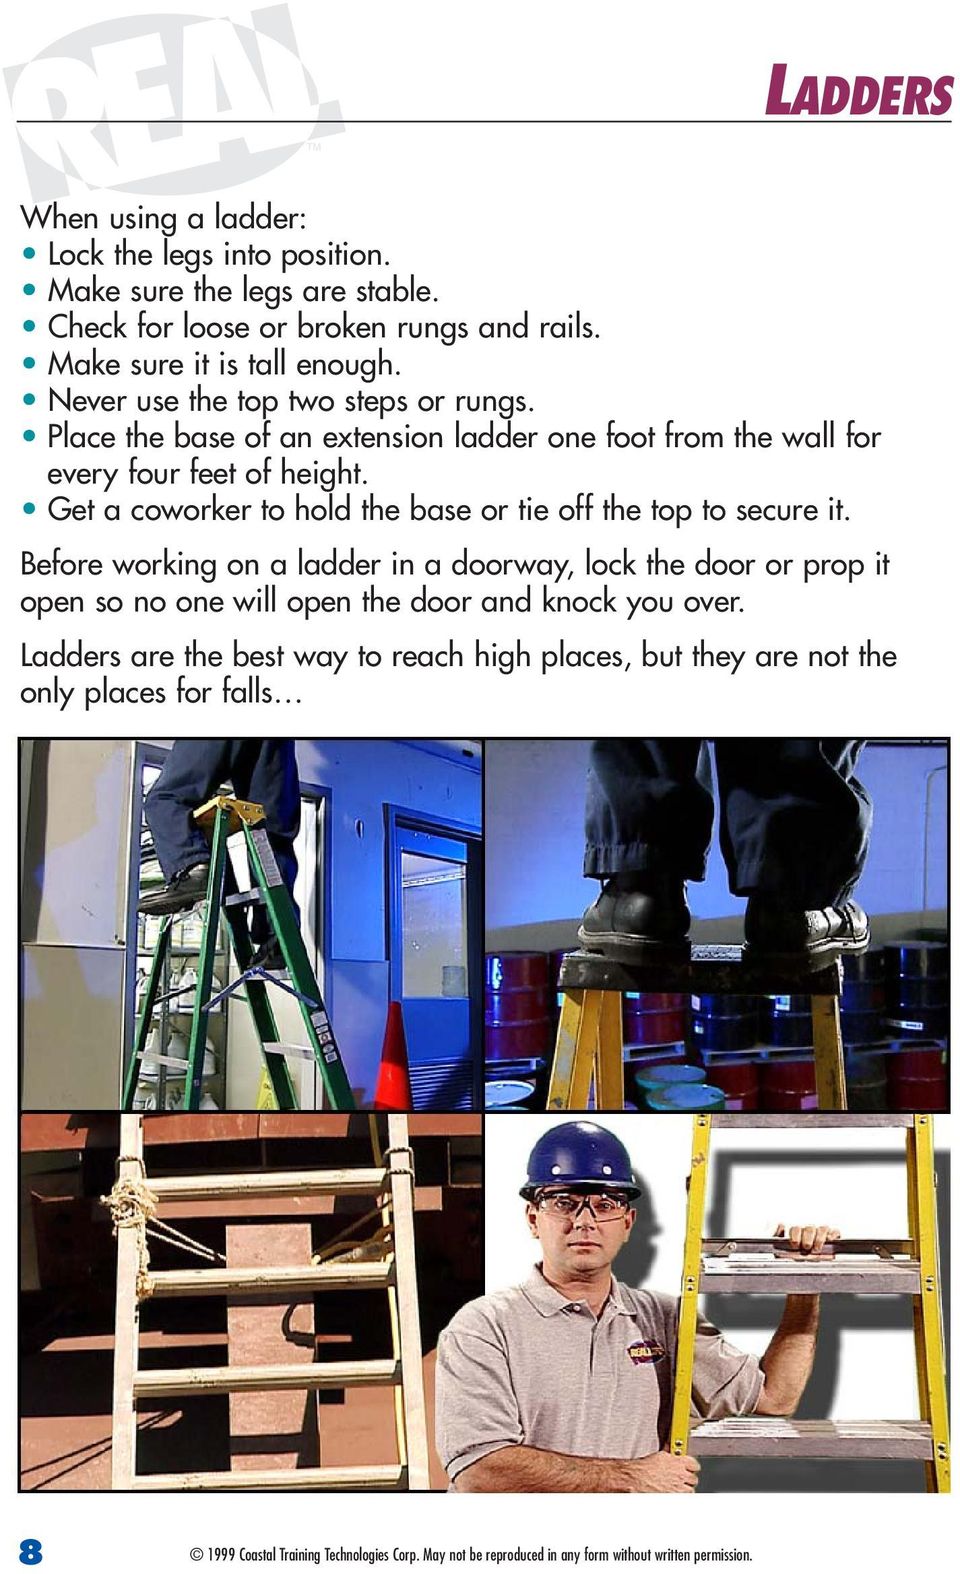 Place the base of an extension ladder one foot from the wall for every four feet of height.